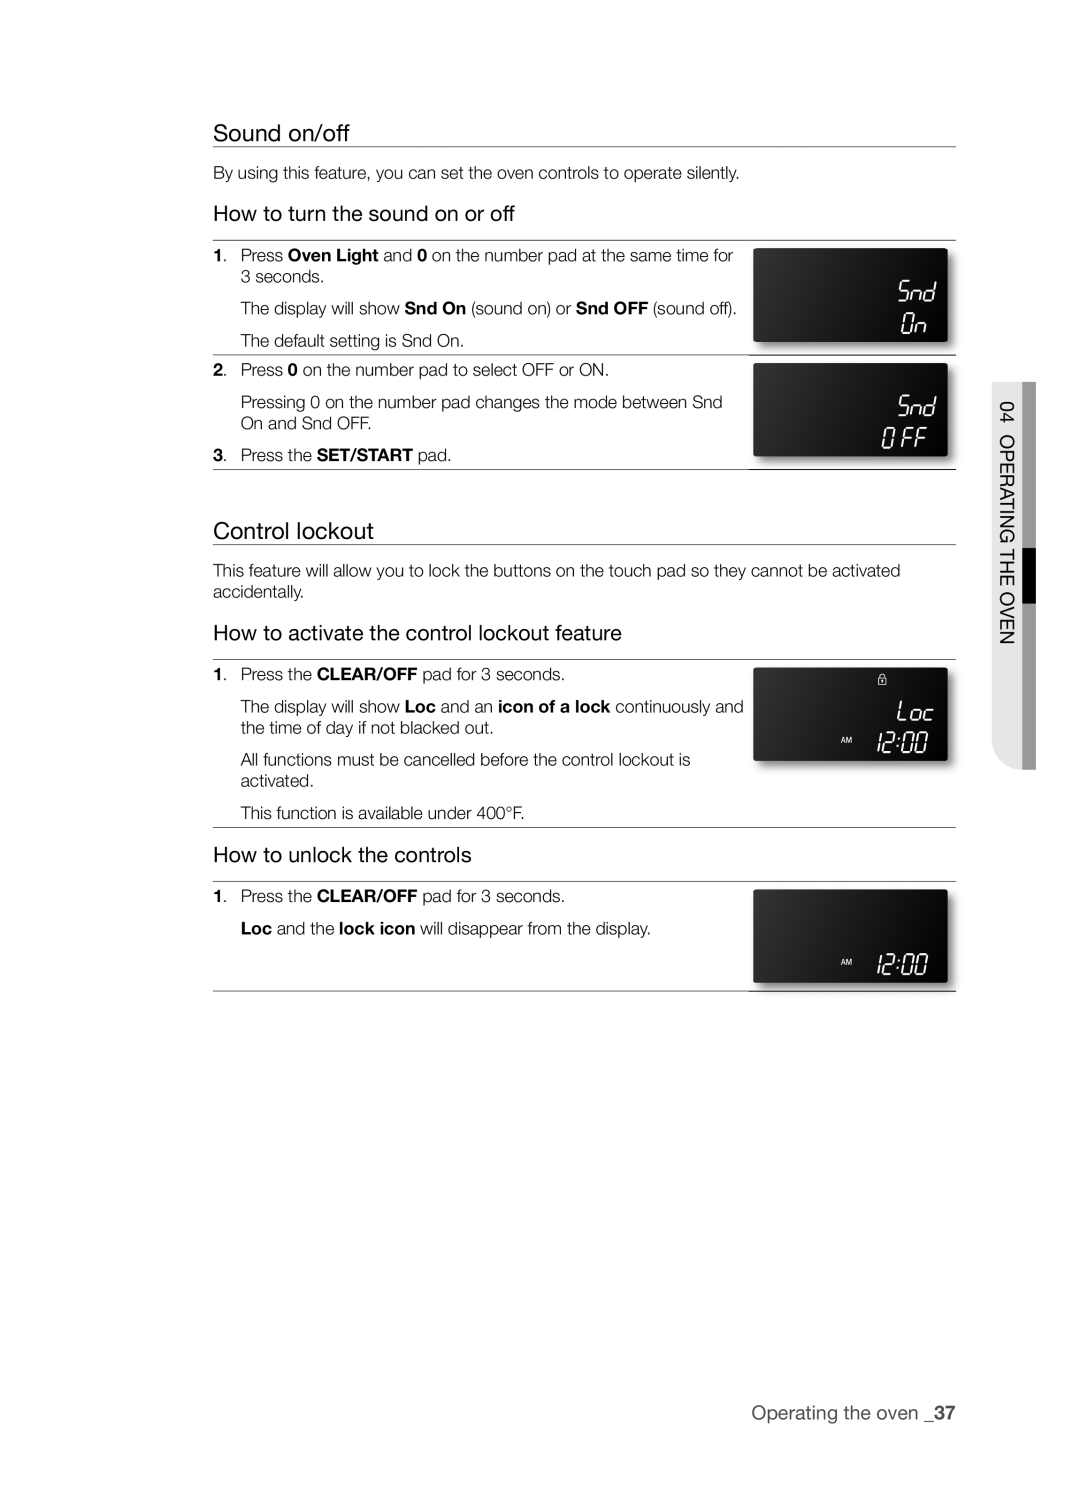 Samsung FTQ386LWUX user manual Sound on/off, Control lockout, How to turn the sound on or off, Operating The Oven 